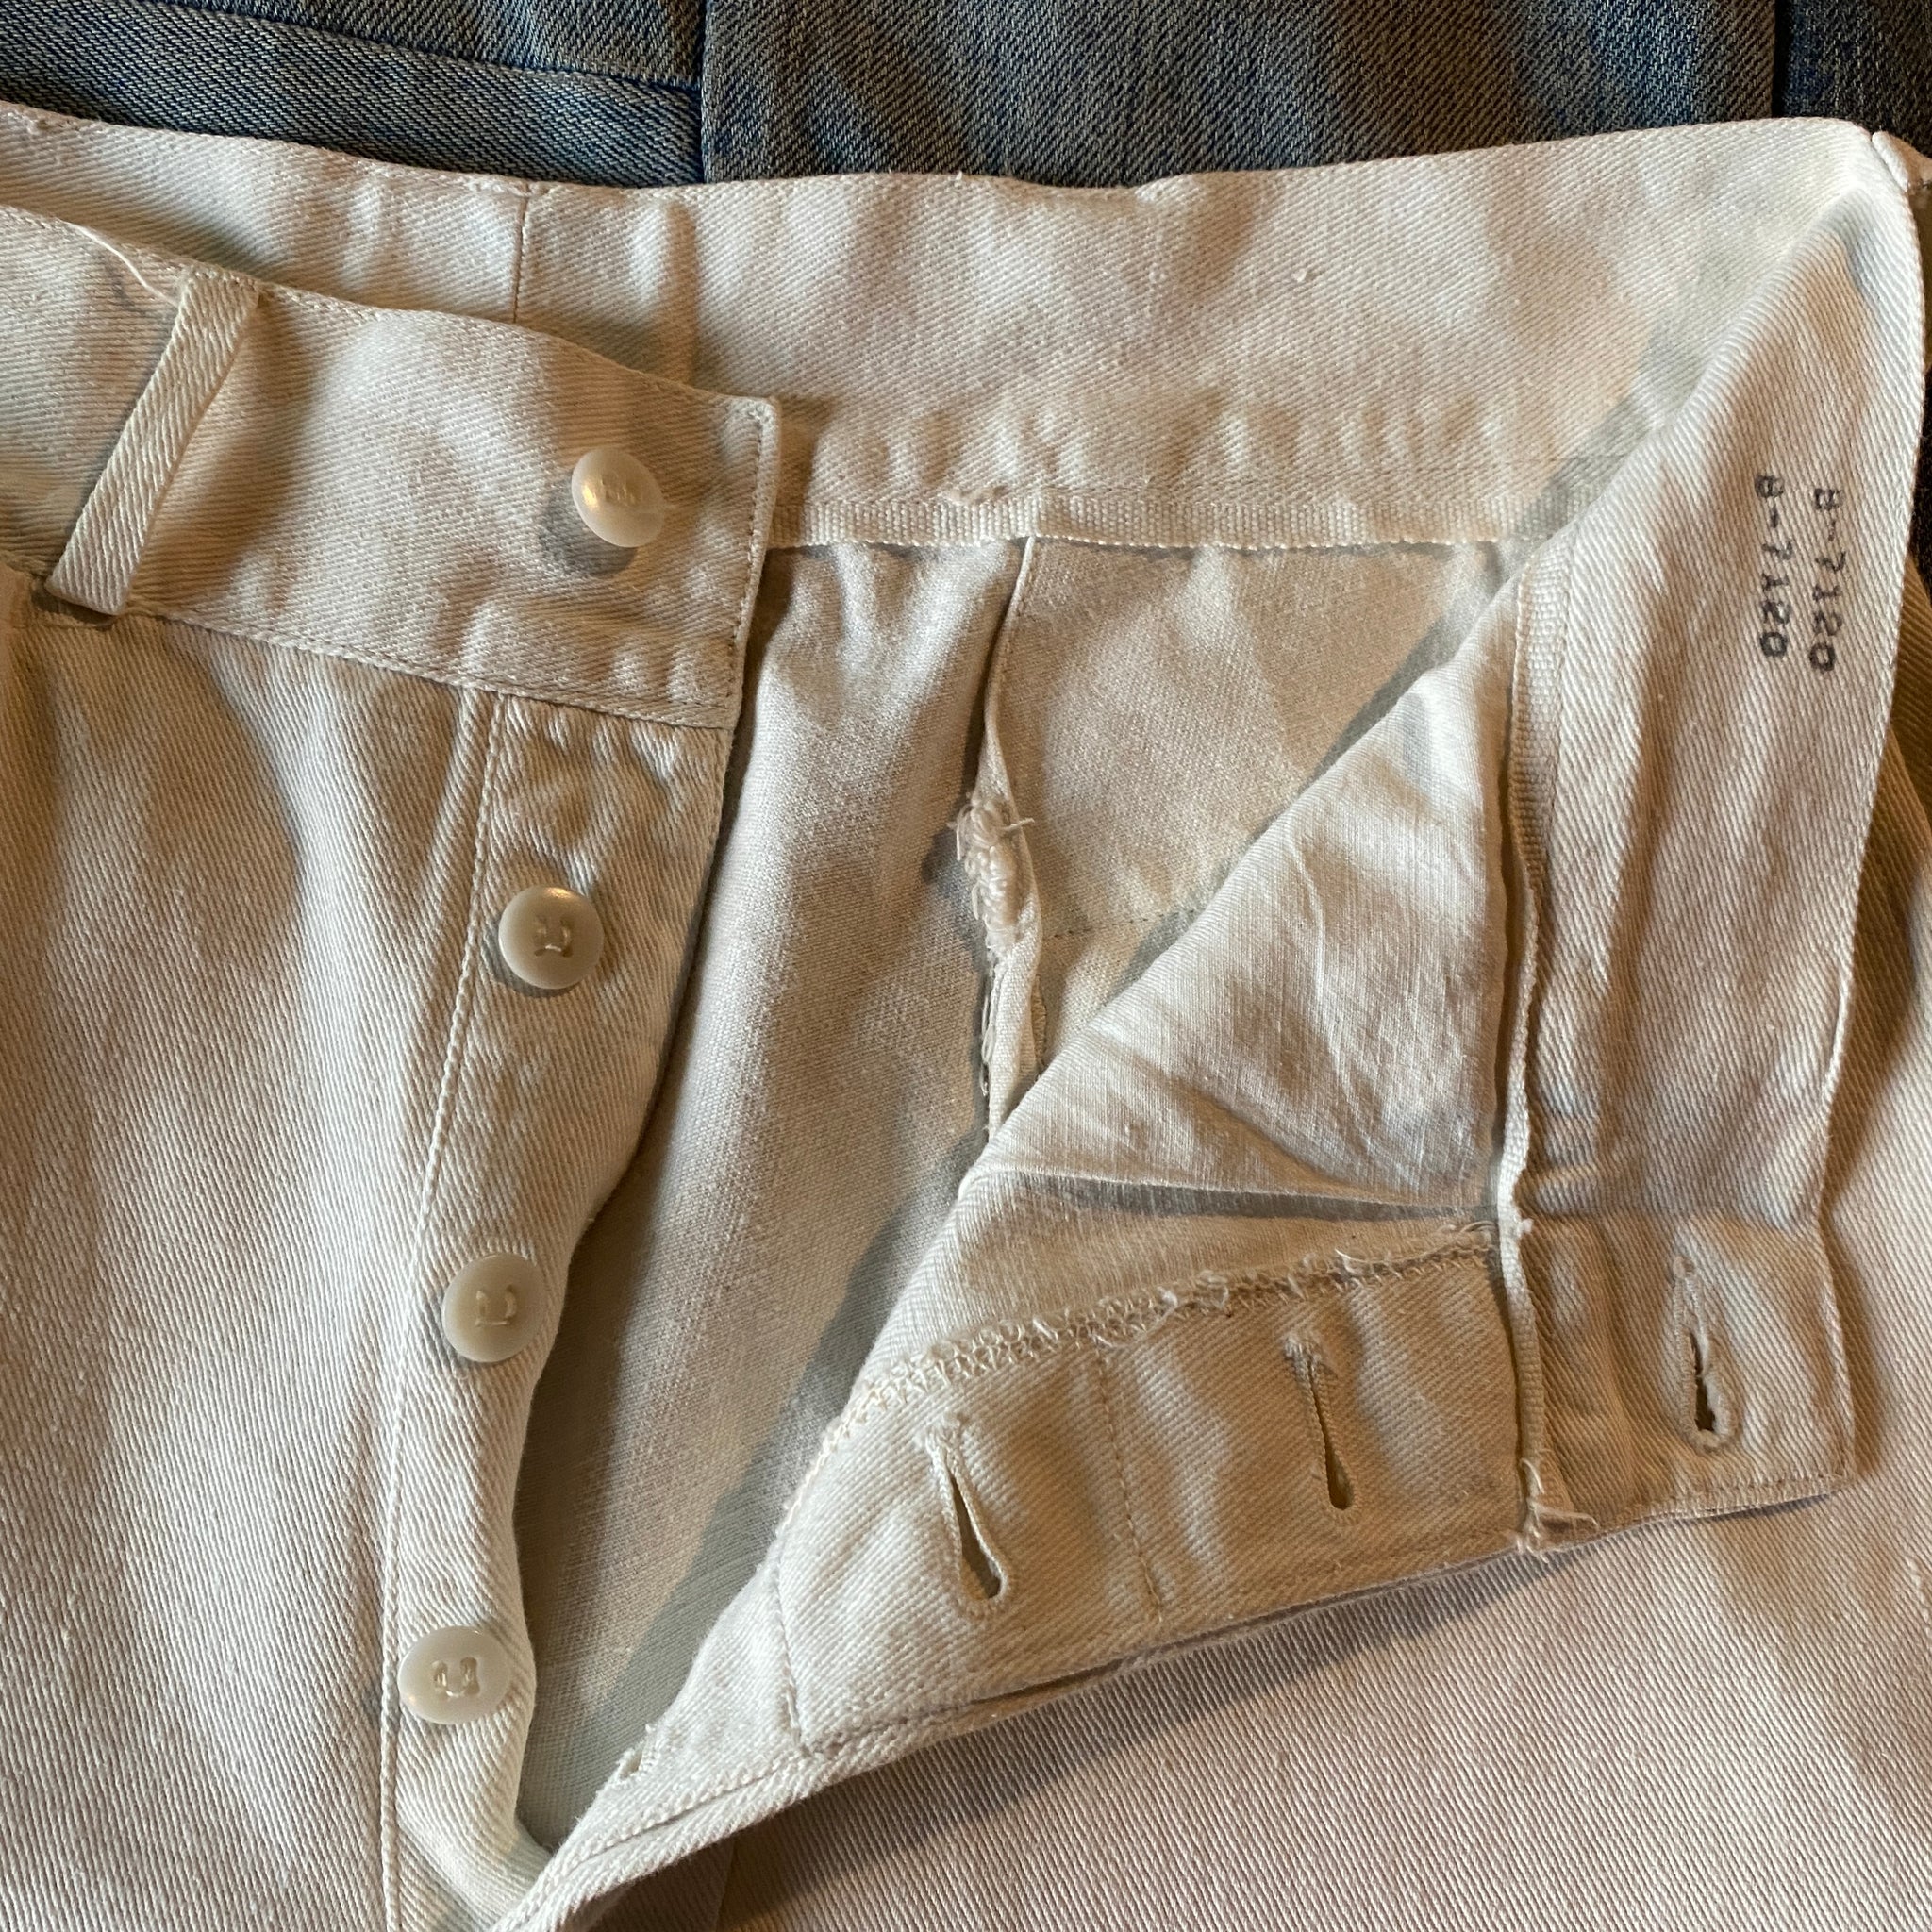 1940's military button fly white cotton slacks by Pancraft - Ver